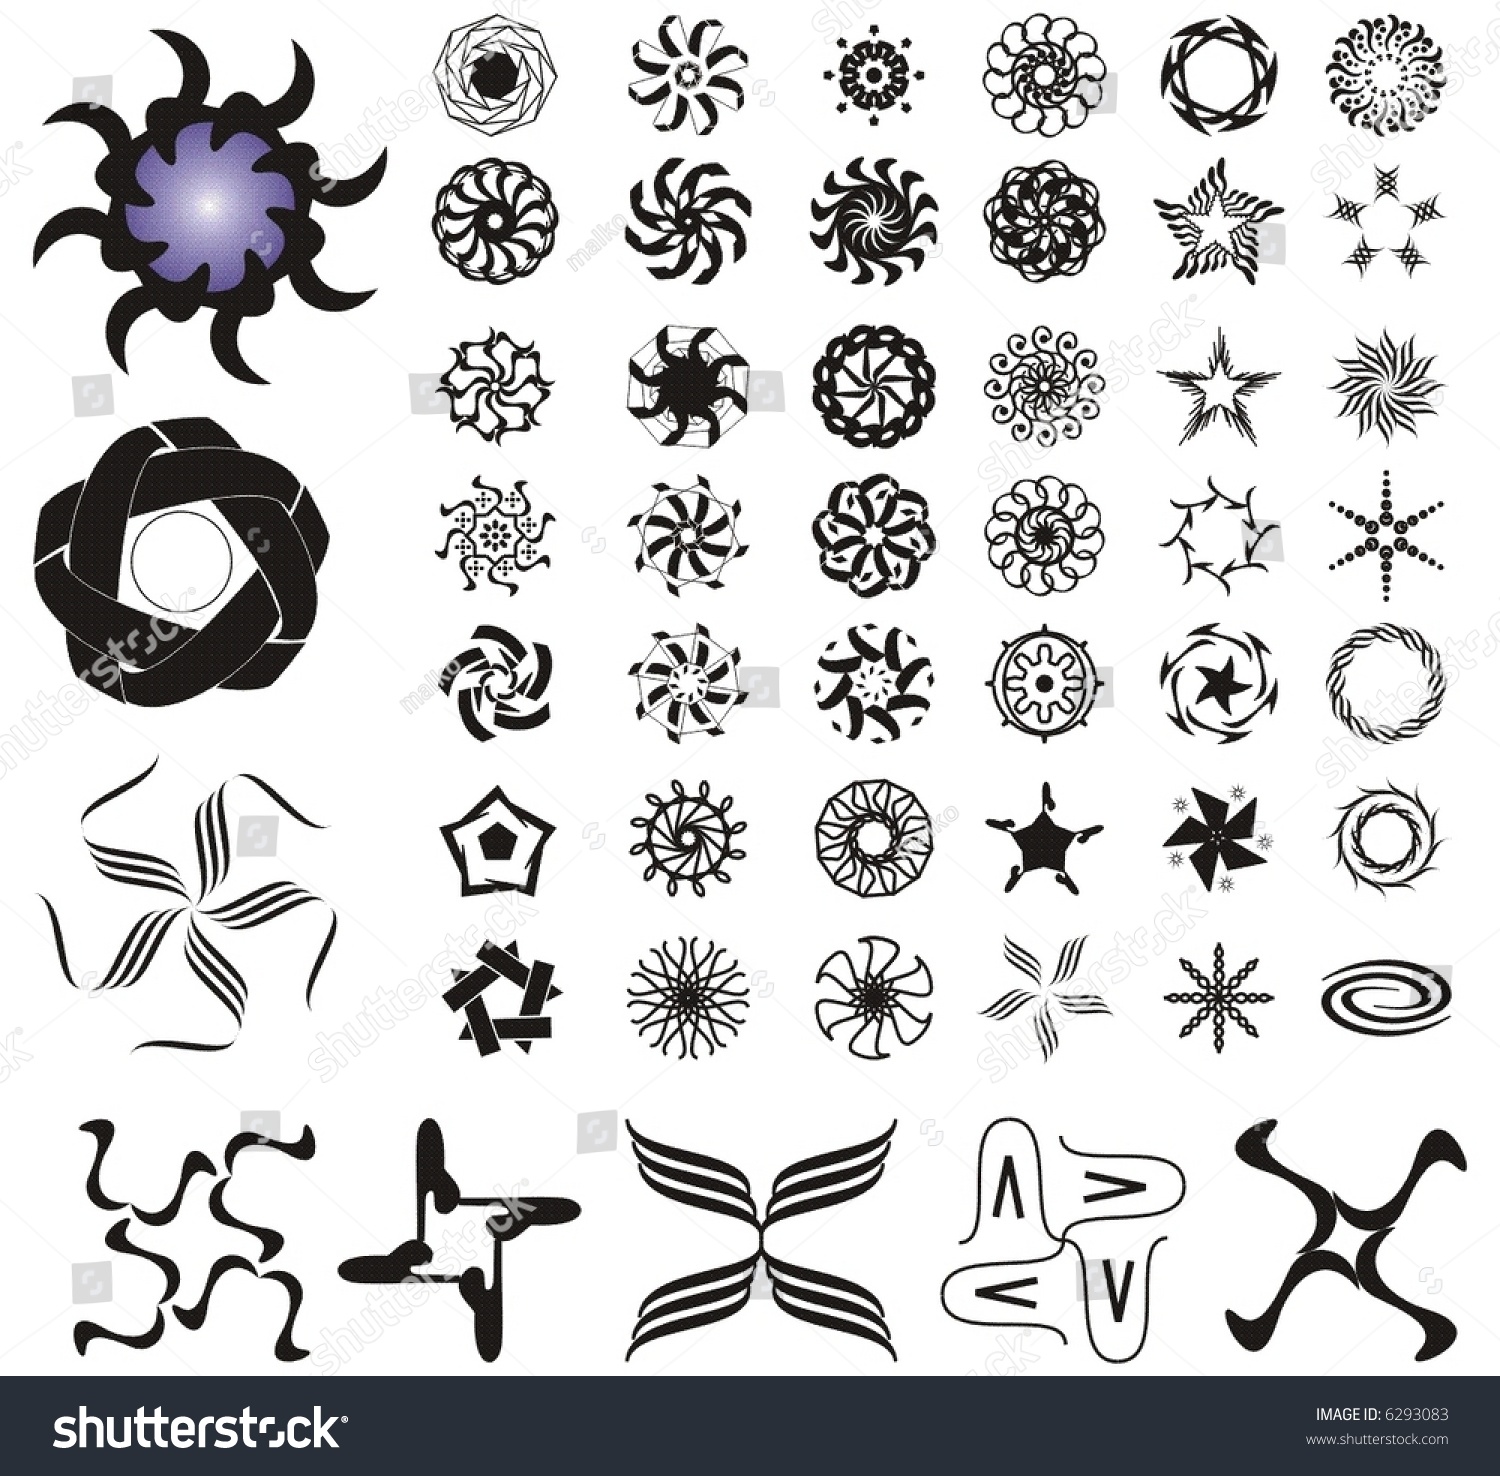 Various Objects And Stars Stock Vector Illustration 6293083 : Shutterstock